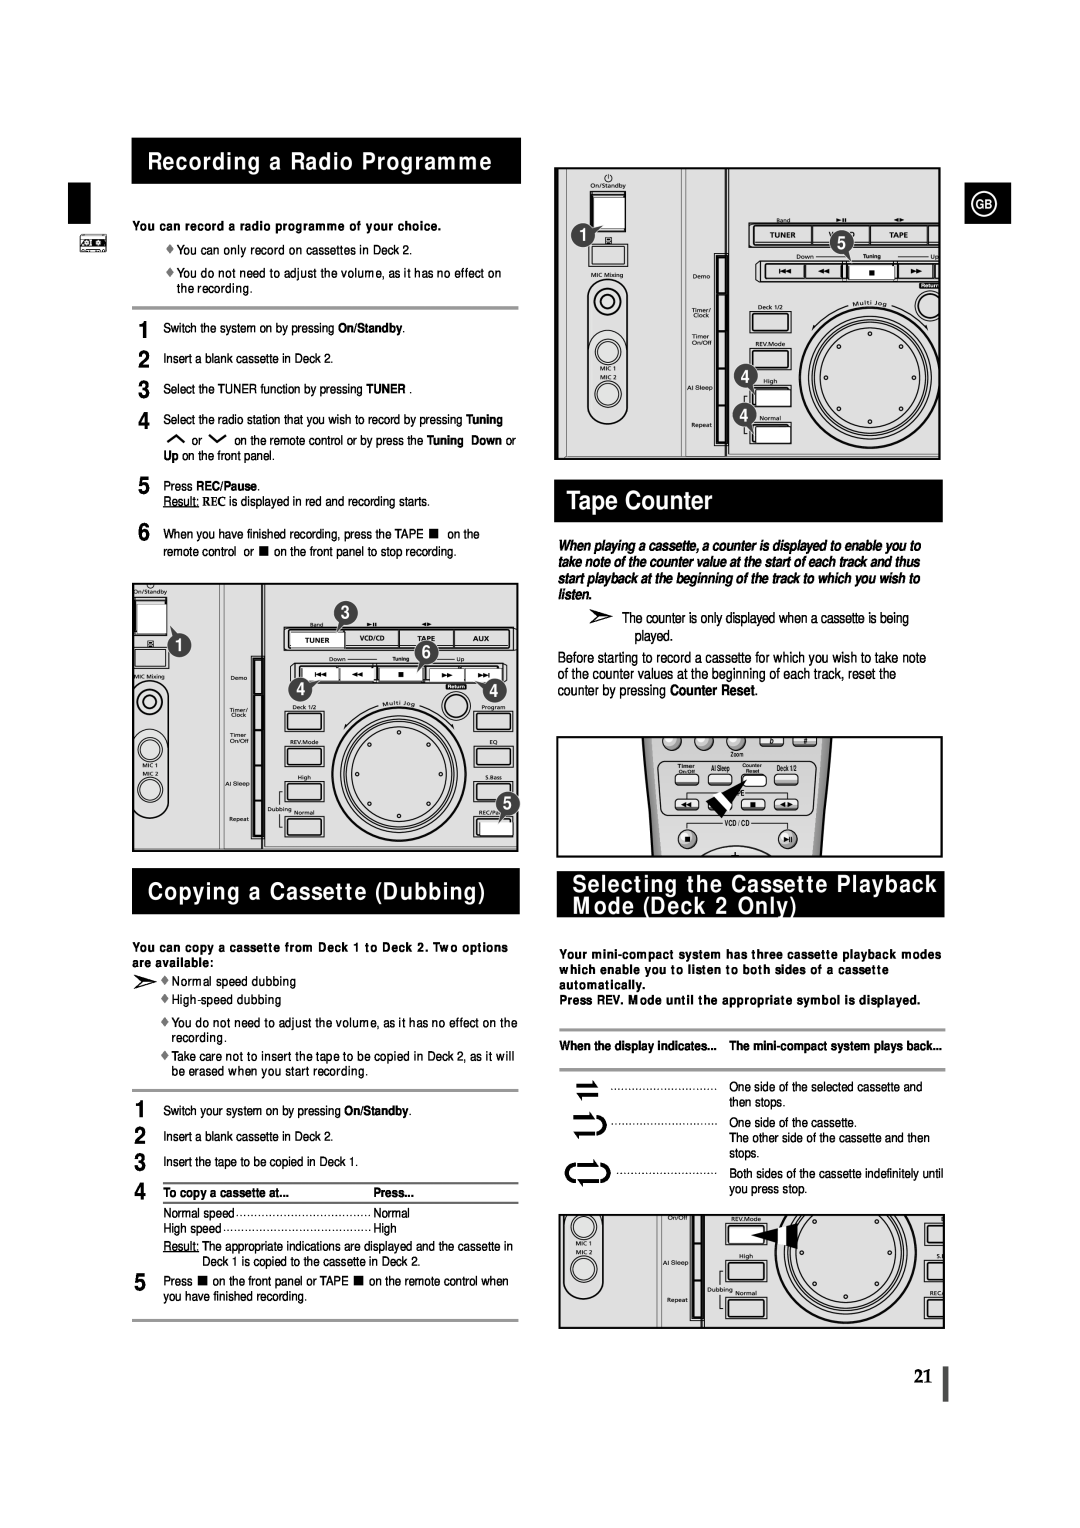 Samsung AH68-00935B, MAX-VL45 instruction manual Recording a Radio Programme, Copying a Cassette Dubbing, Tape Counter 